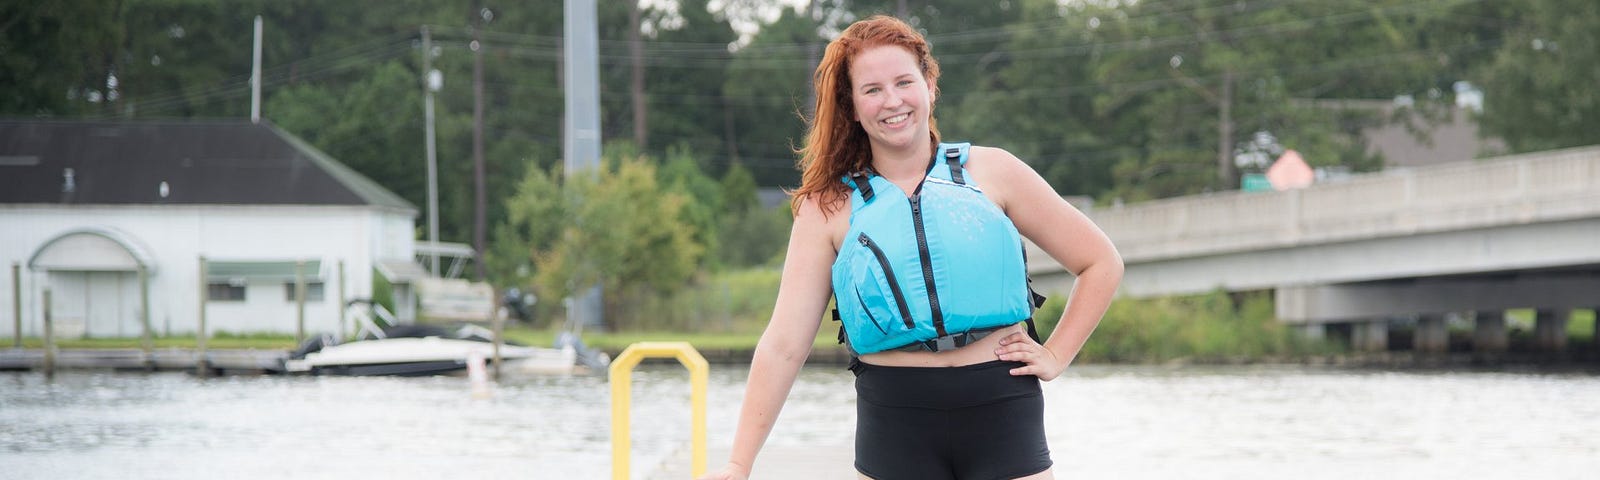 Woman wearing blue life jacket stands in front of a stand up paddle board on a dock